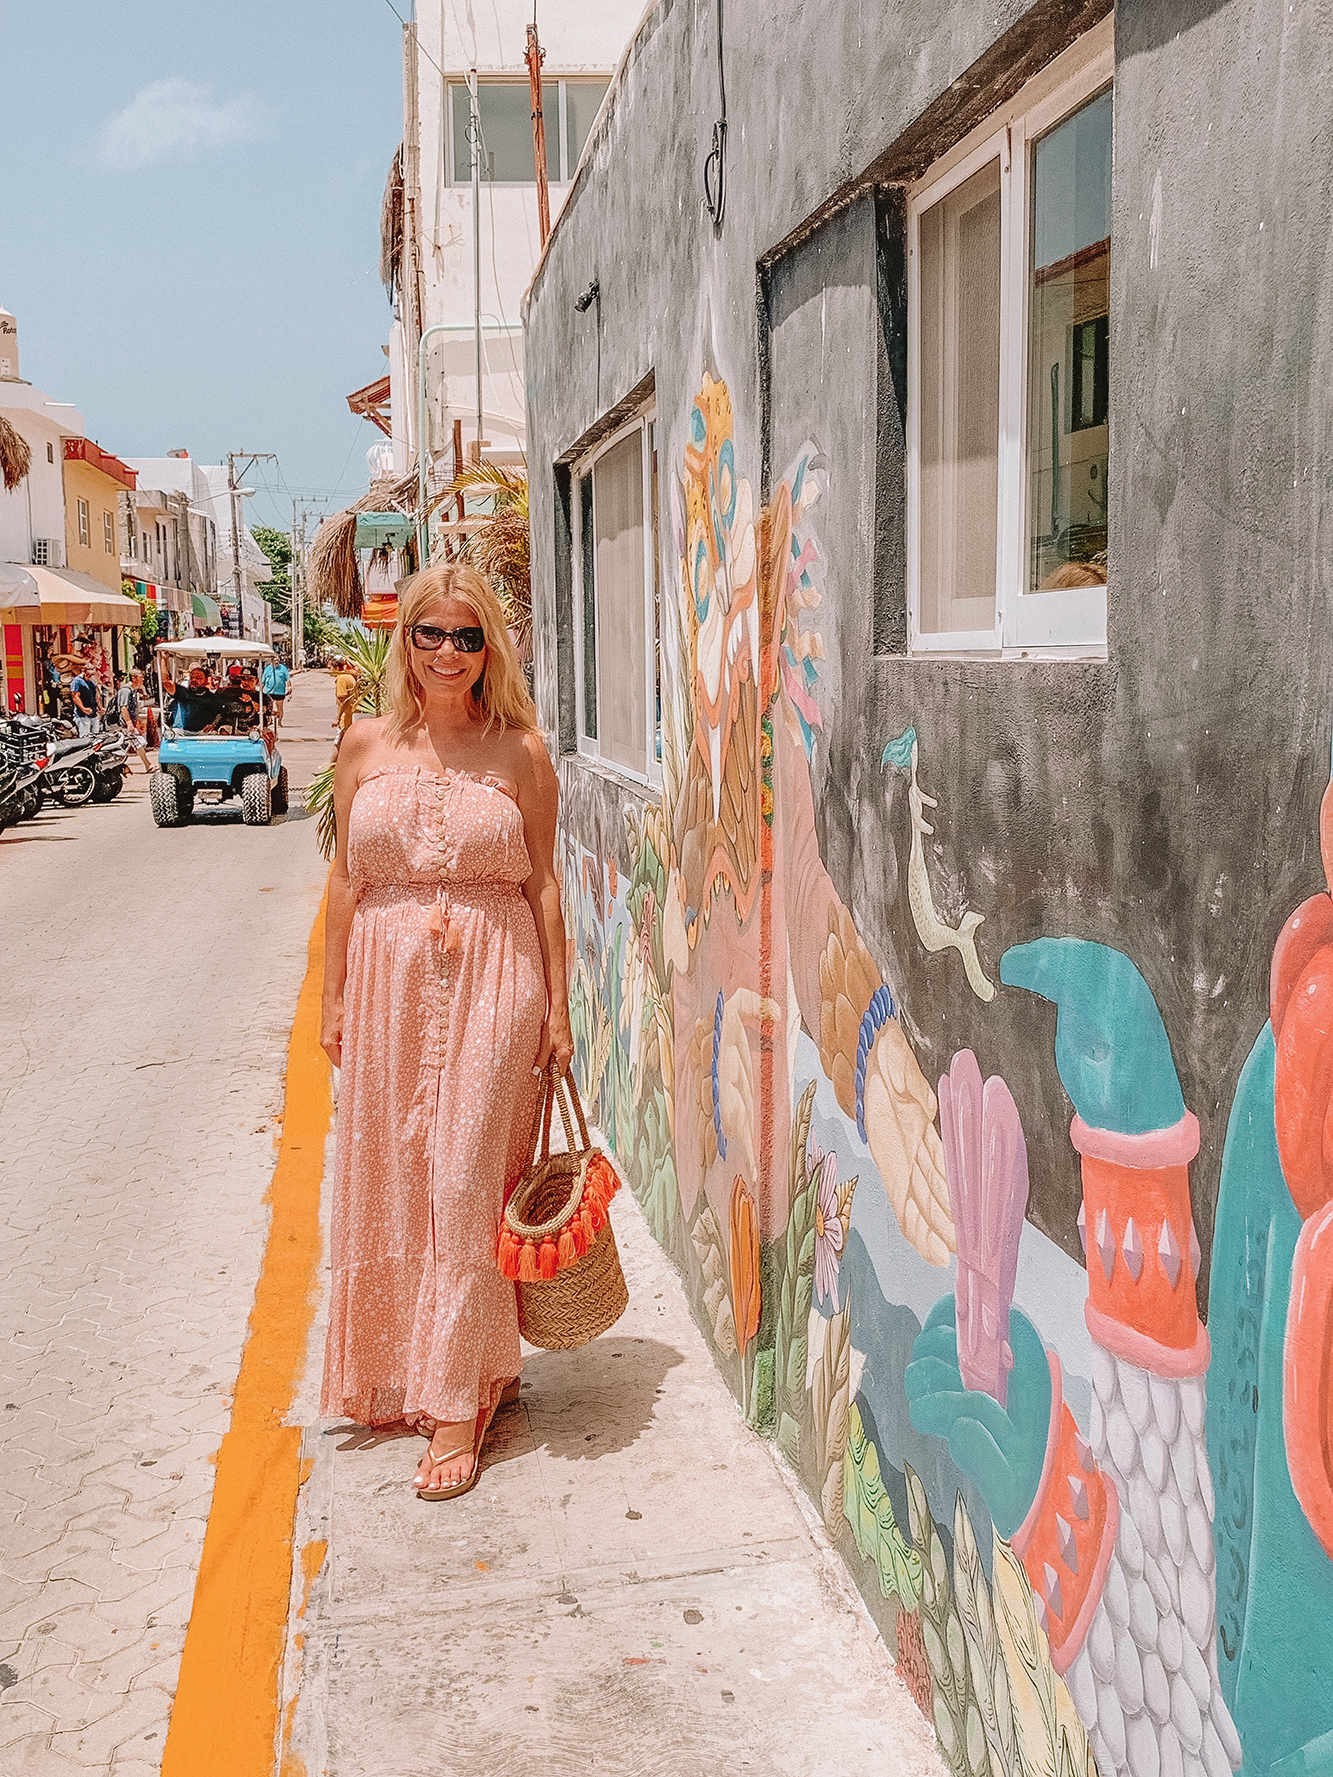 What to pack for a trip to Mexico - Adorable dresses, swimwear, shoes, accessories and more! Everything you need for an upcoming holiday this Summer.